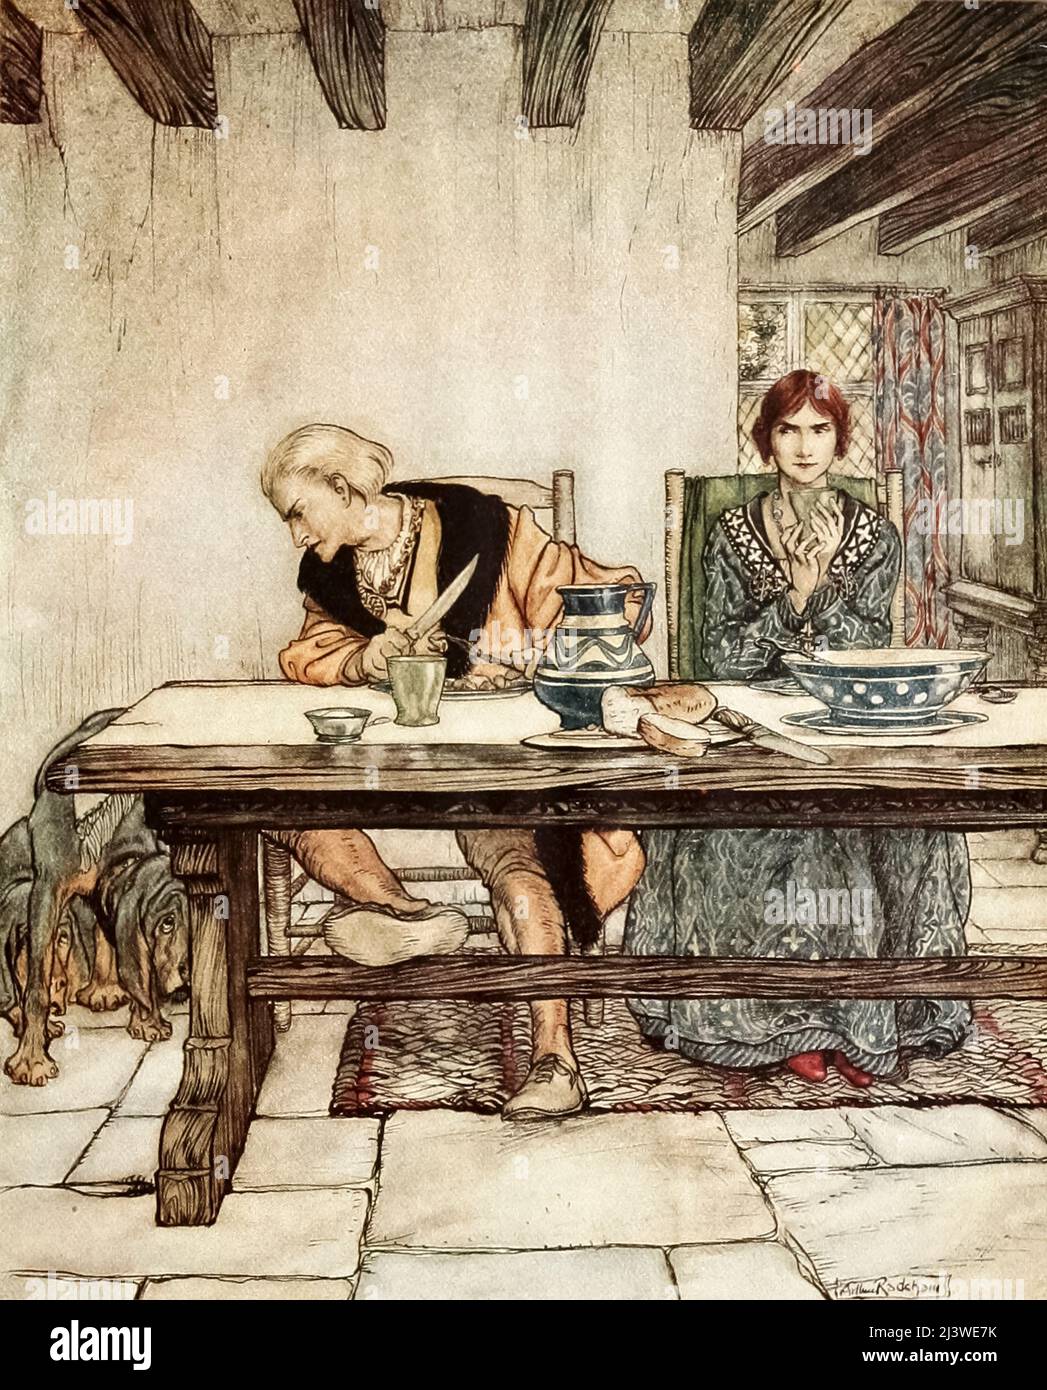 'Lord Randall', or 'Lord Randal', (Roud 10, Child 12) is an Anglo-Scottish border ballad consisting of dialogue between a young Lord and his mother. Appeared in the book ' Some British ballads ' illustrated by Arthur Rackham, Publisher New York : Dodd, Mead 1919 Lord Randall returns home to his mother after visiting his lover. Randall explains that his lover gave him a dinner of eels and that his hunting dogs died after eating the scraps of the meal, leading his mother to realize that he has been poisoned. In some variants, Randall dictates his last will and testament in readiness for his impe Stock Photo